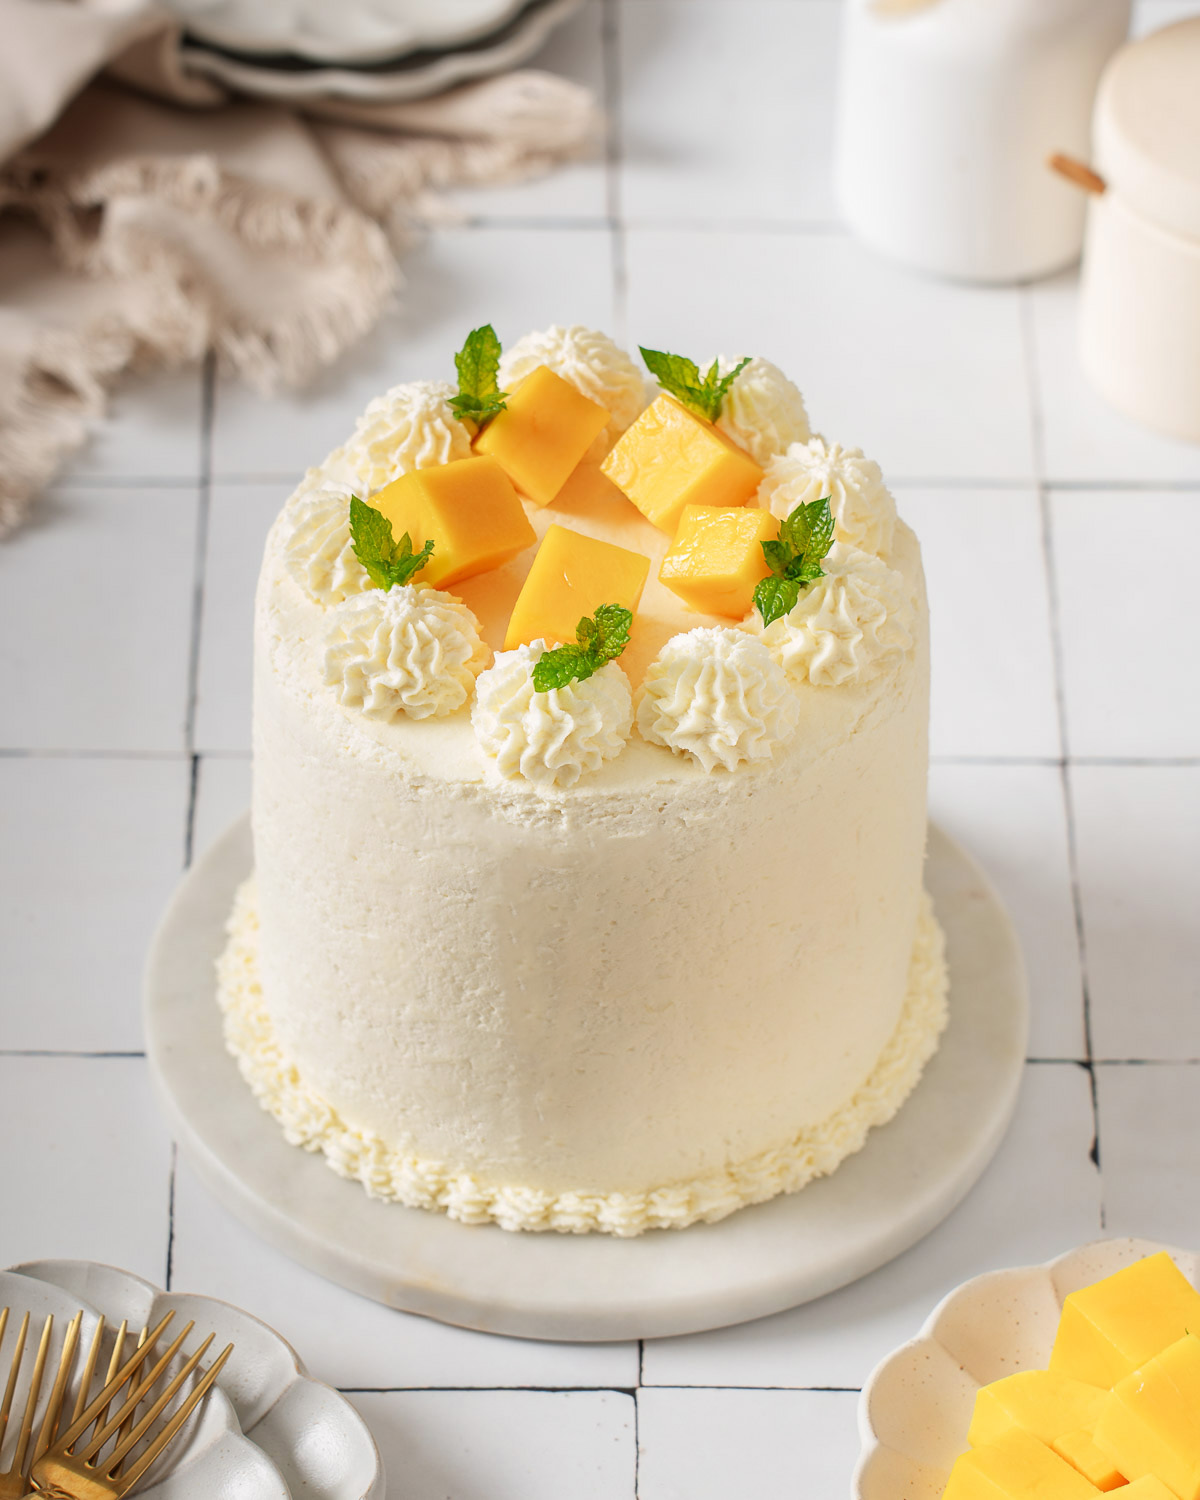 A mango cake sitting on a tiled counter.